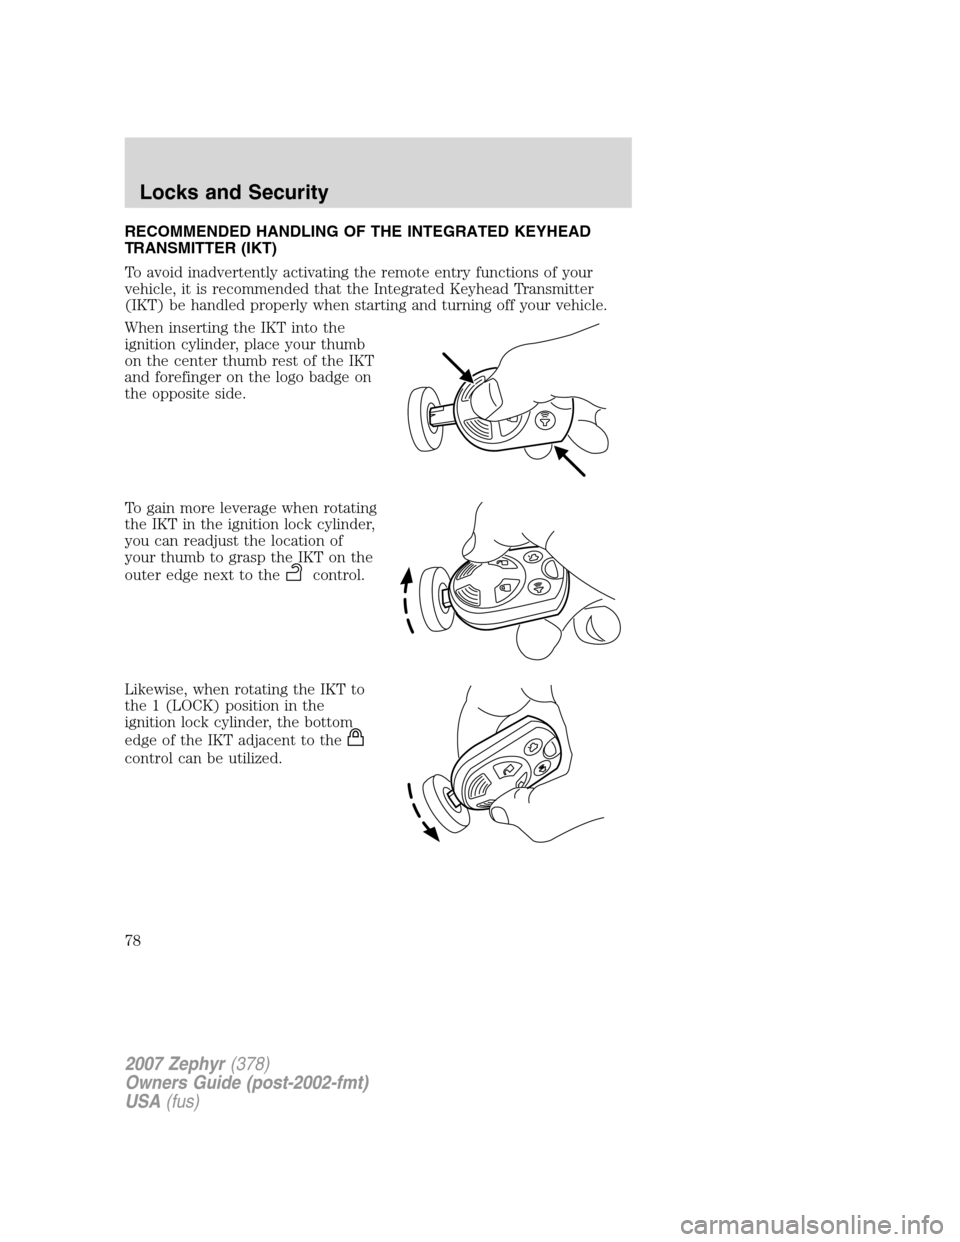 LINCOLN MKZ 2007  Owners Manual RECOMMENDED HANDLING OF THE INTEGRATED KEYHEAD
TRANSMITTER (IKT)
To avoid inadvertently activating the remote entry functions of your
vehicle, it is recommended that the Integrated Keyhead Transmitter